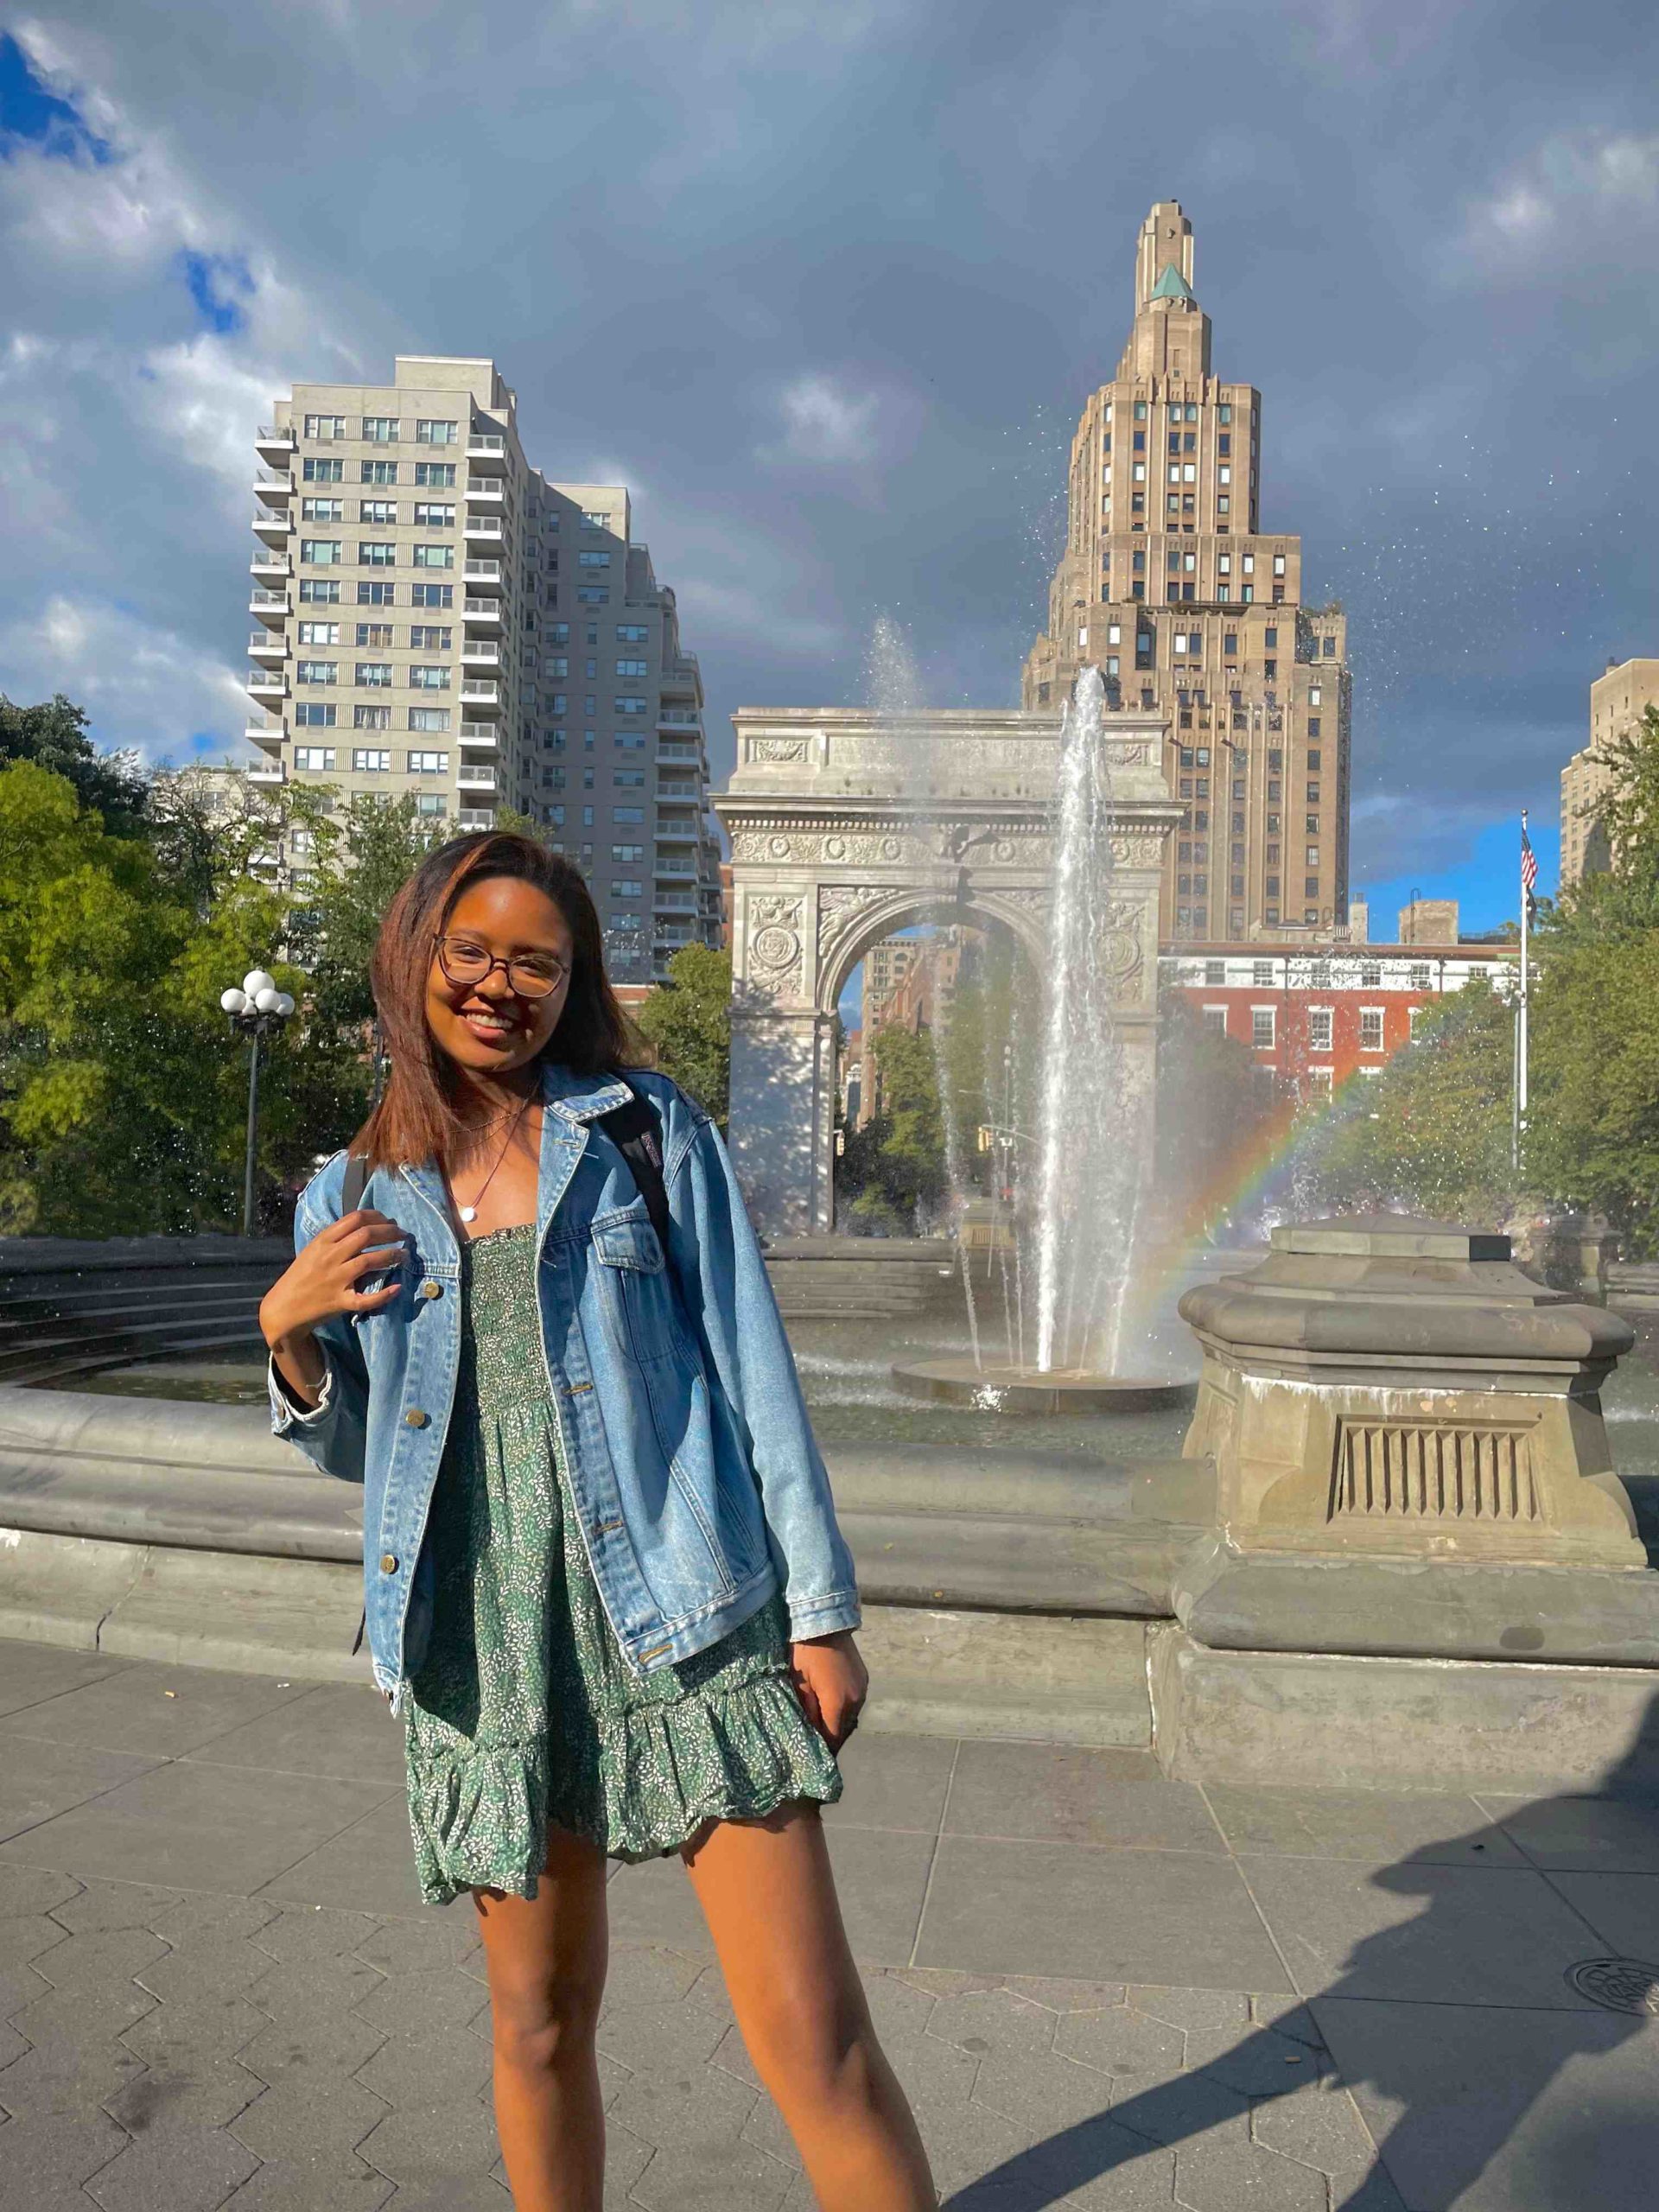 NYU student in front of the Washington Square fountain and arch at NYU.